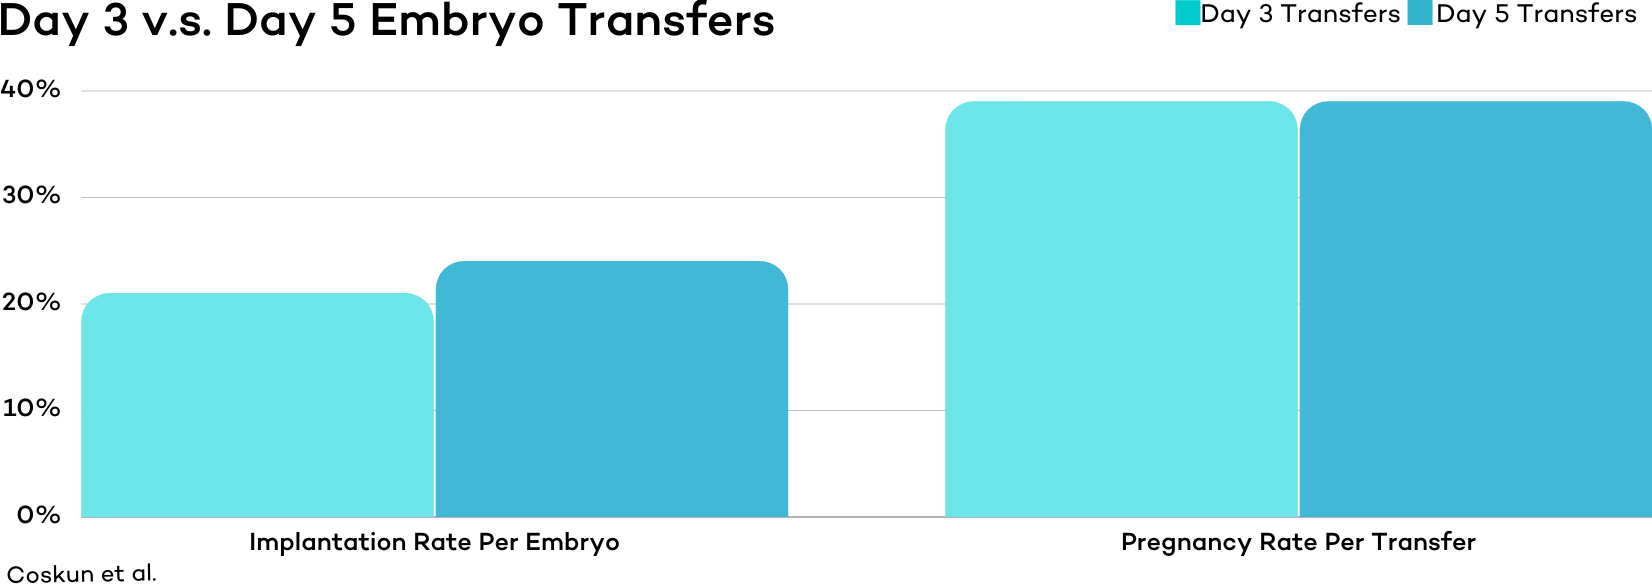 Day 3 and Day 5 Embryo Transfer Success Rates